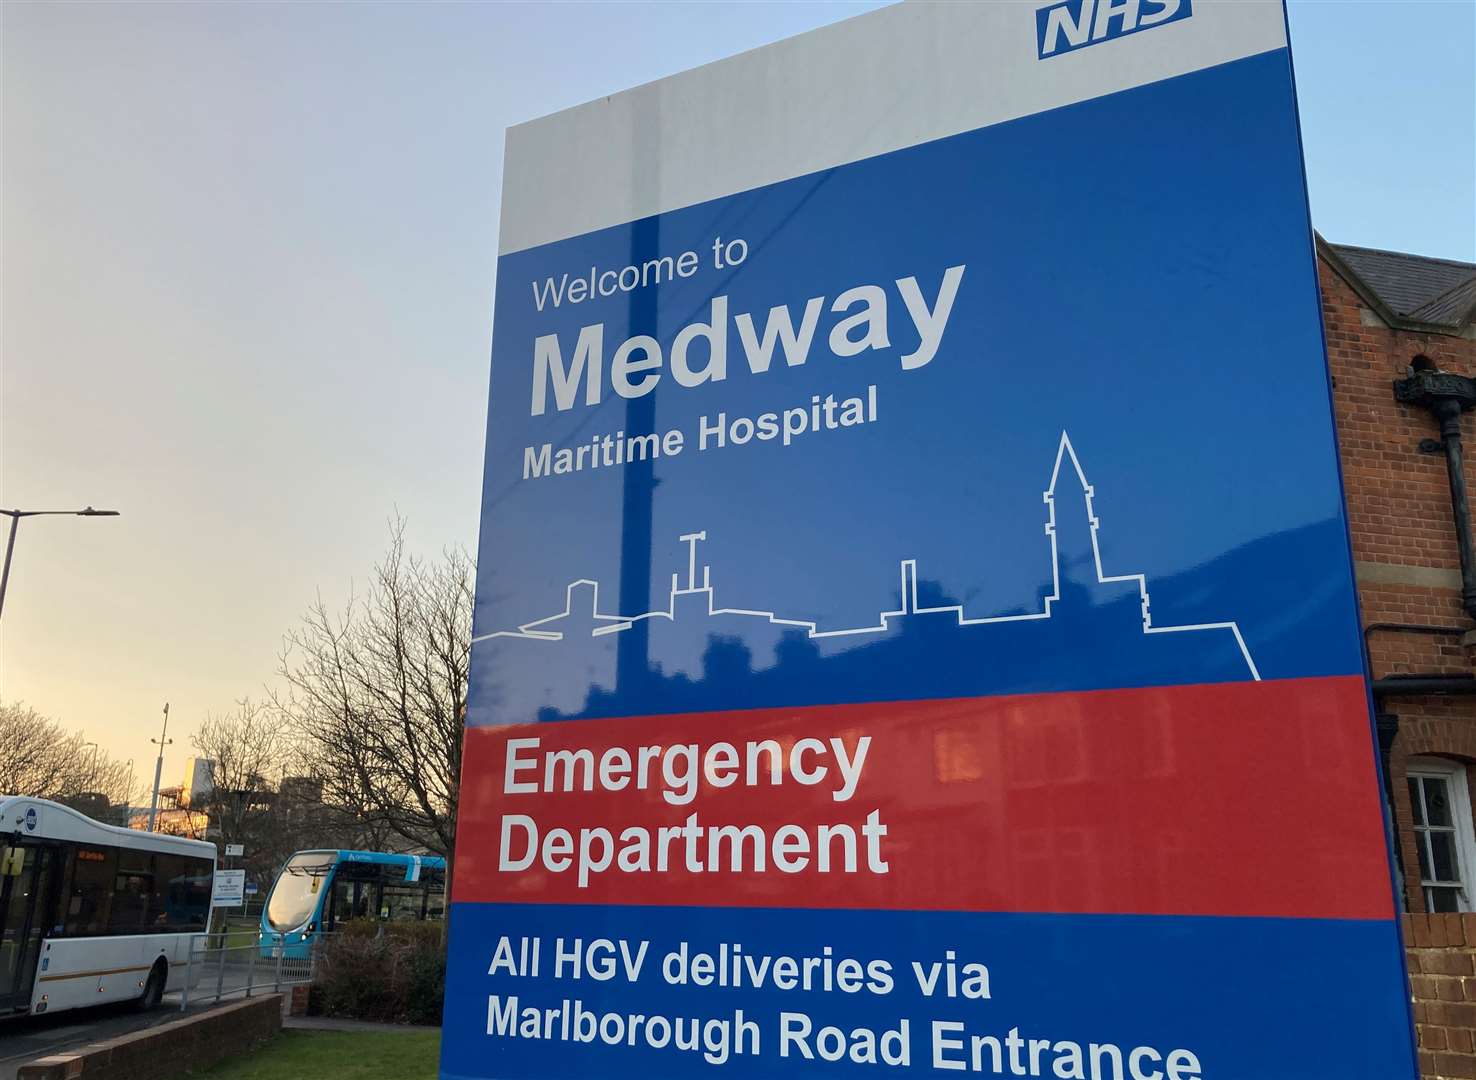 Medway Maritime Hospital in Windmill Road, Gillingham